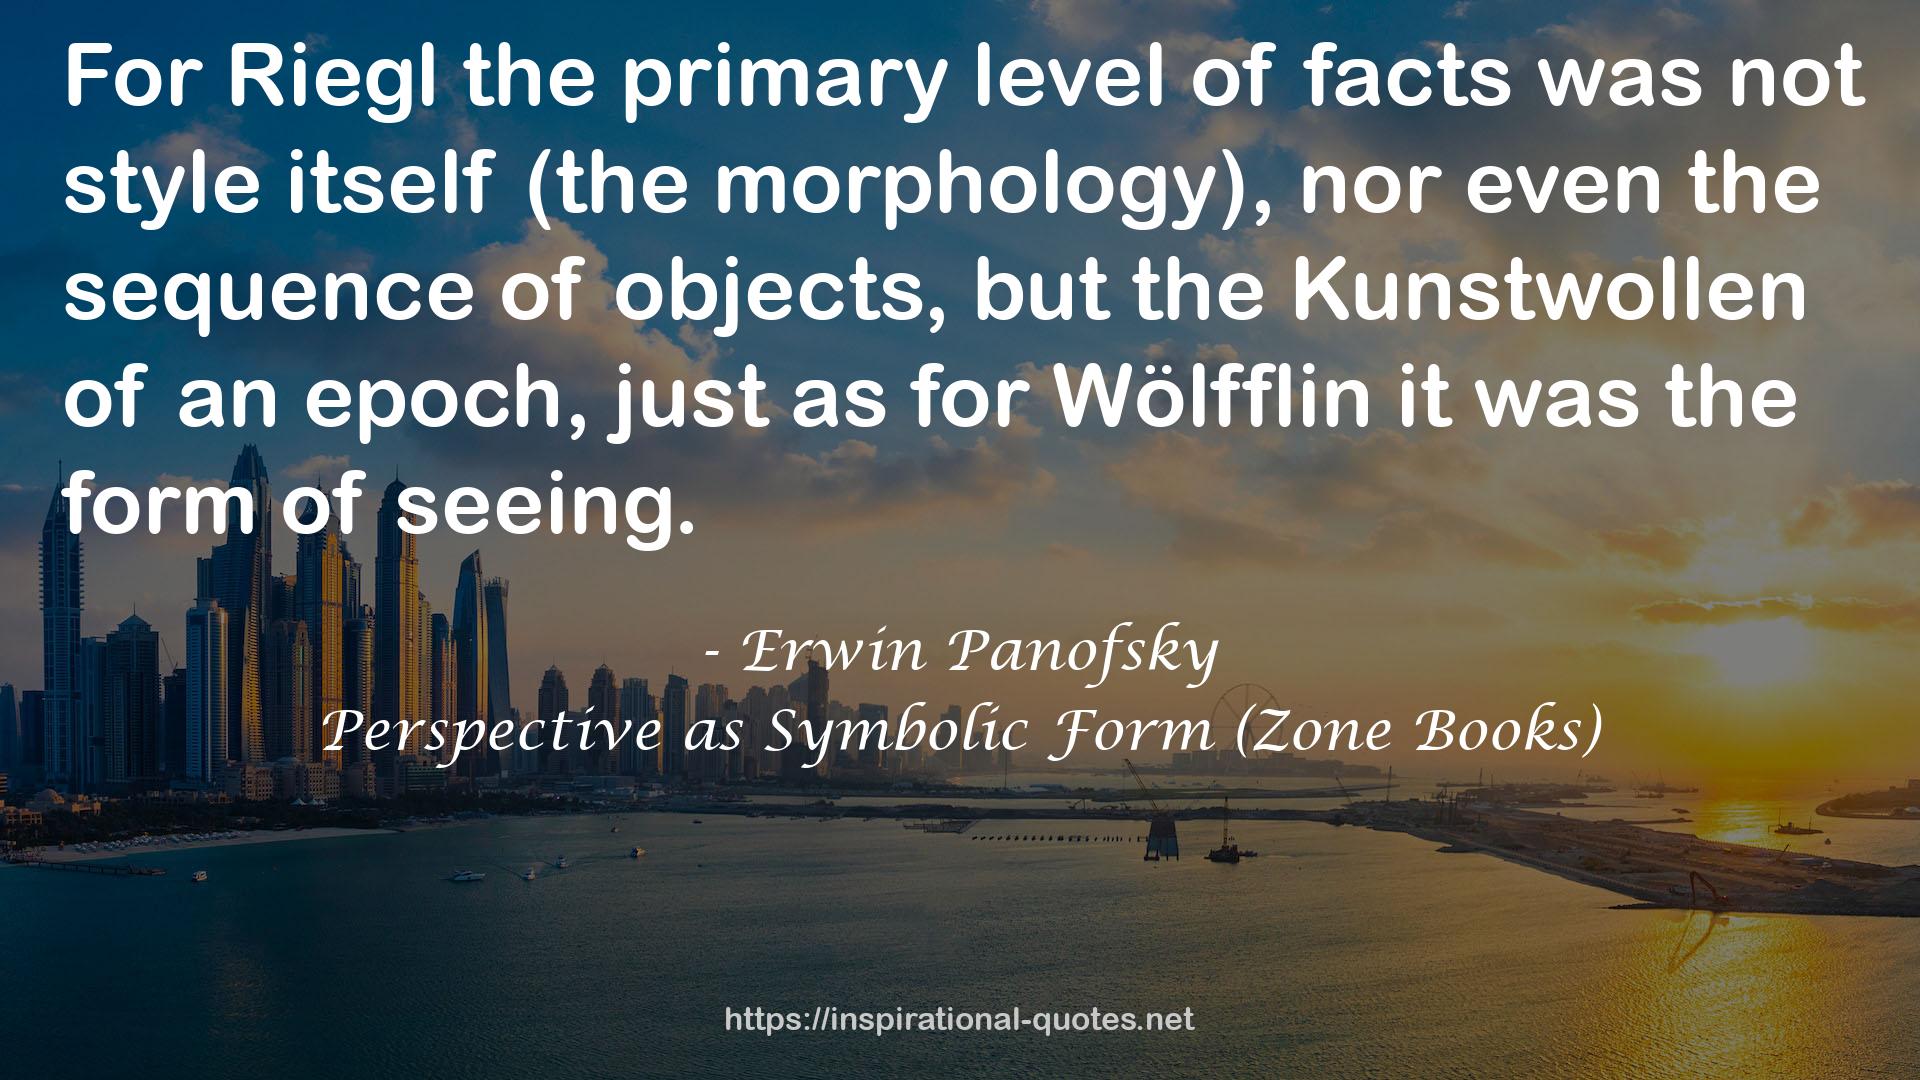 Perspective as Symbolic Form (Zone Books) QUOTES